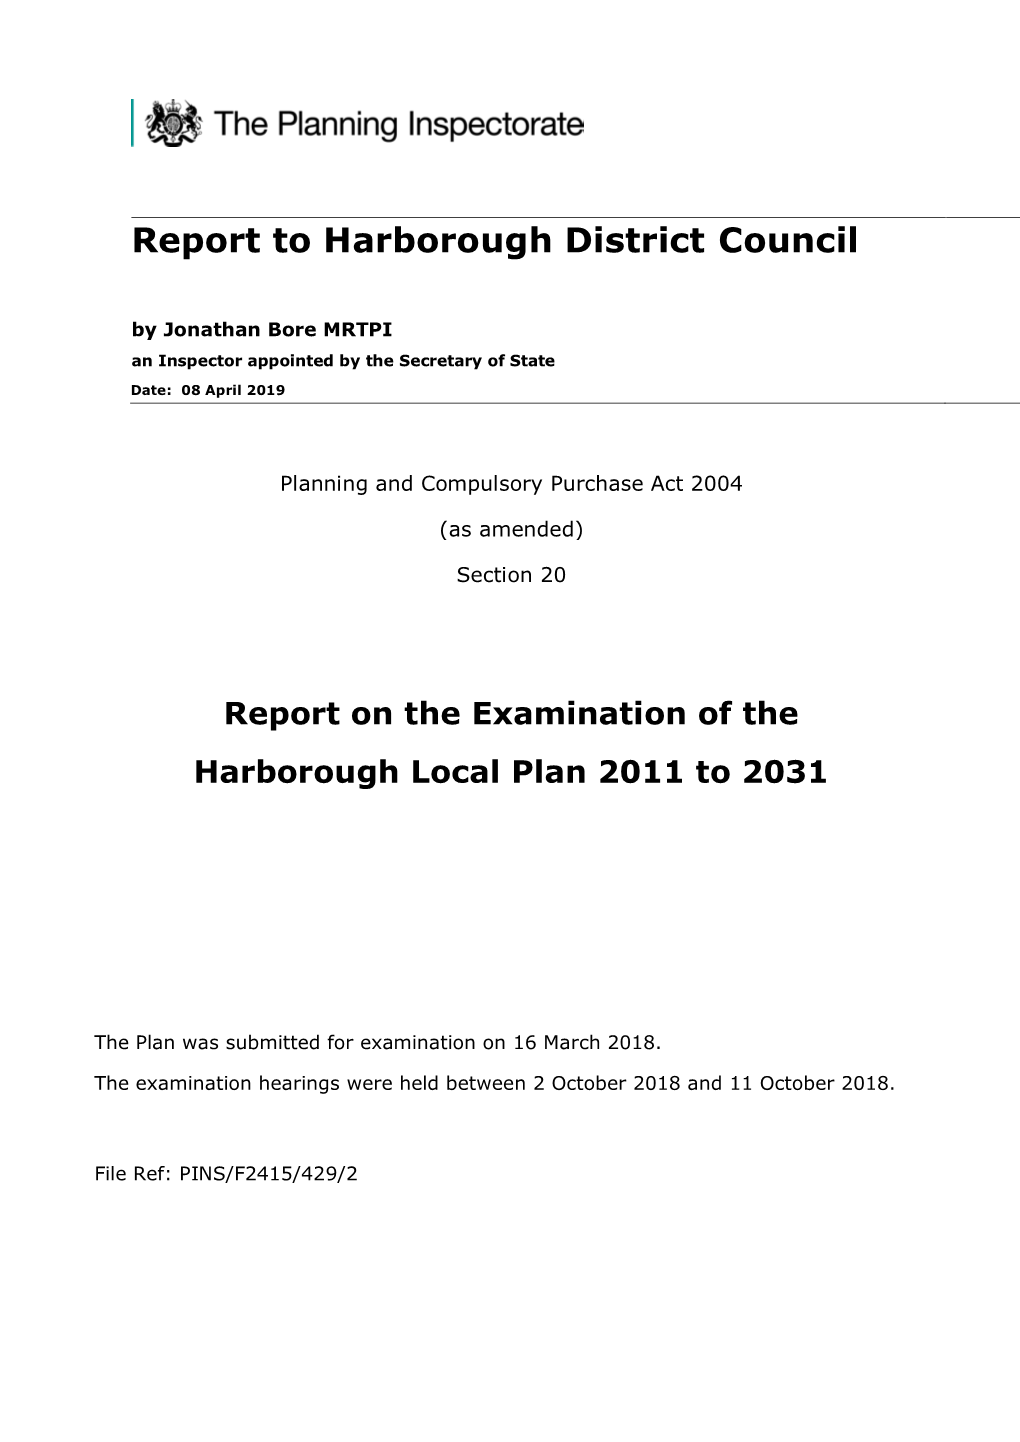 Report to Harborough District Council